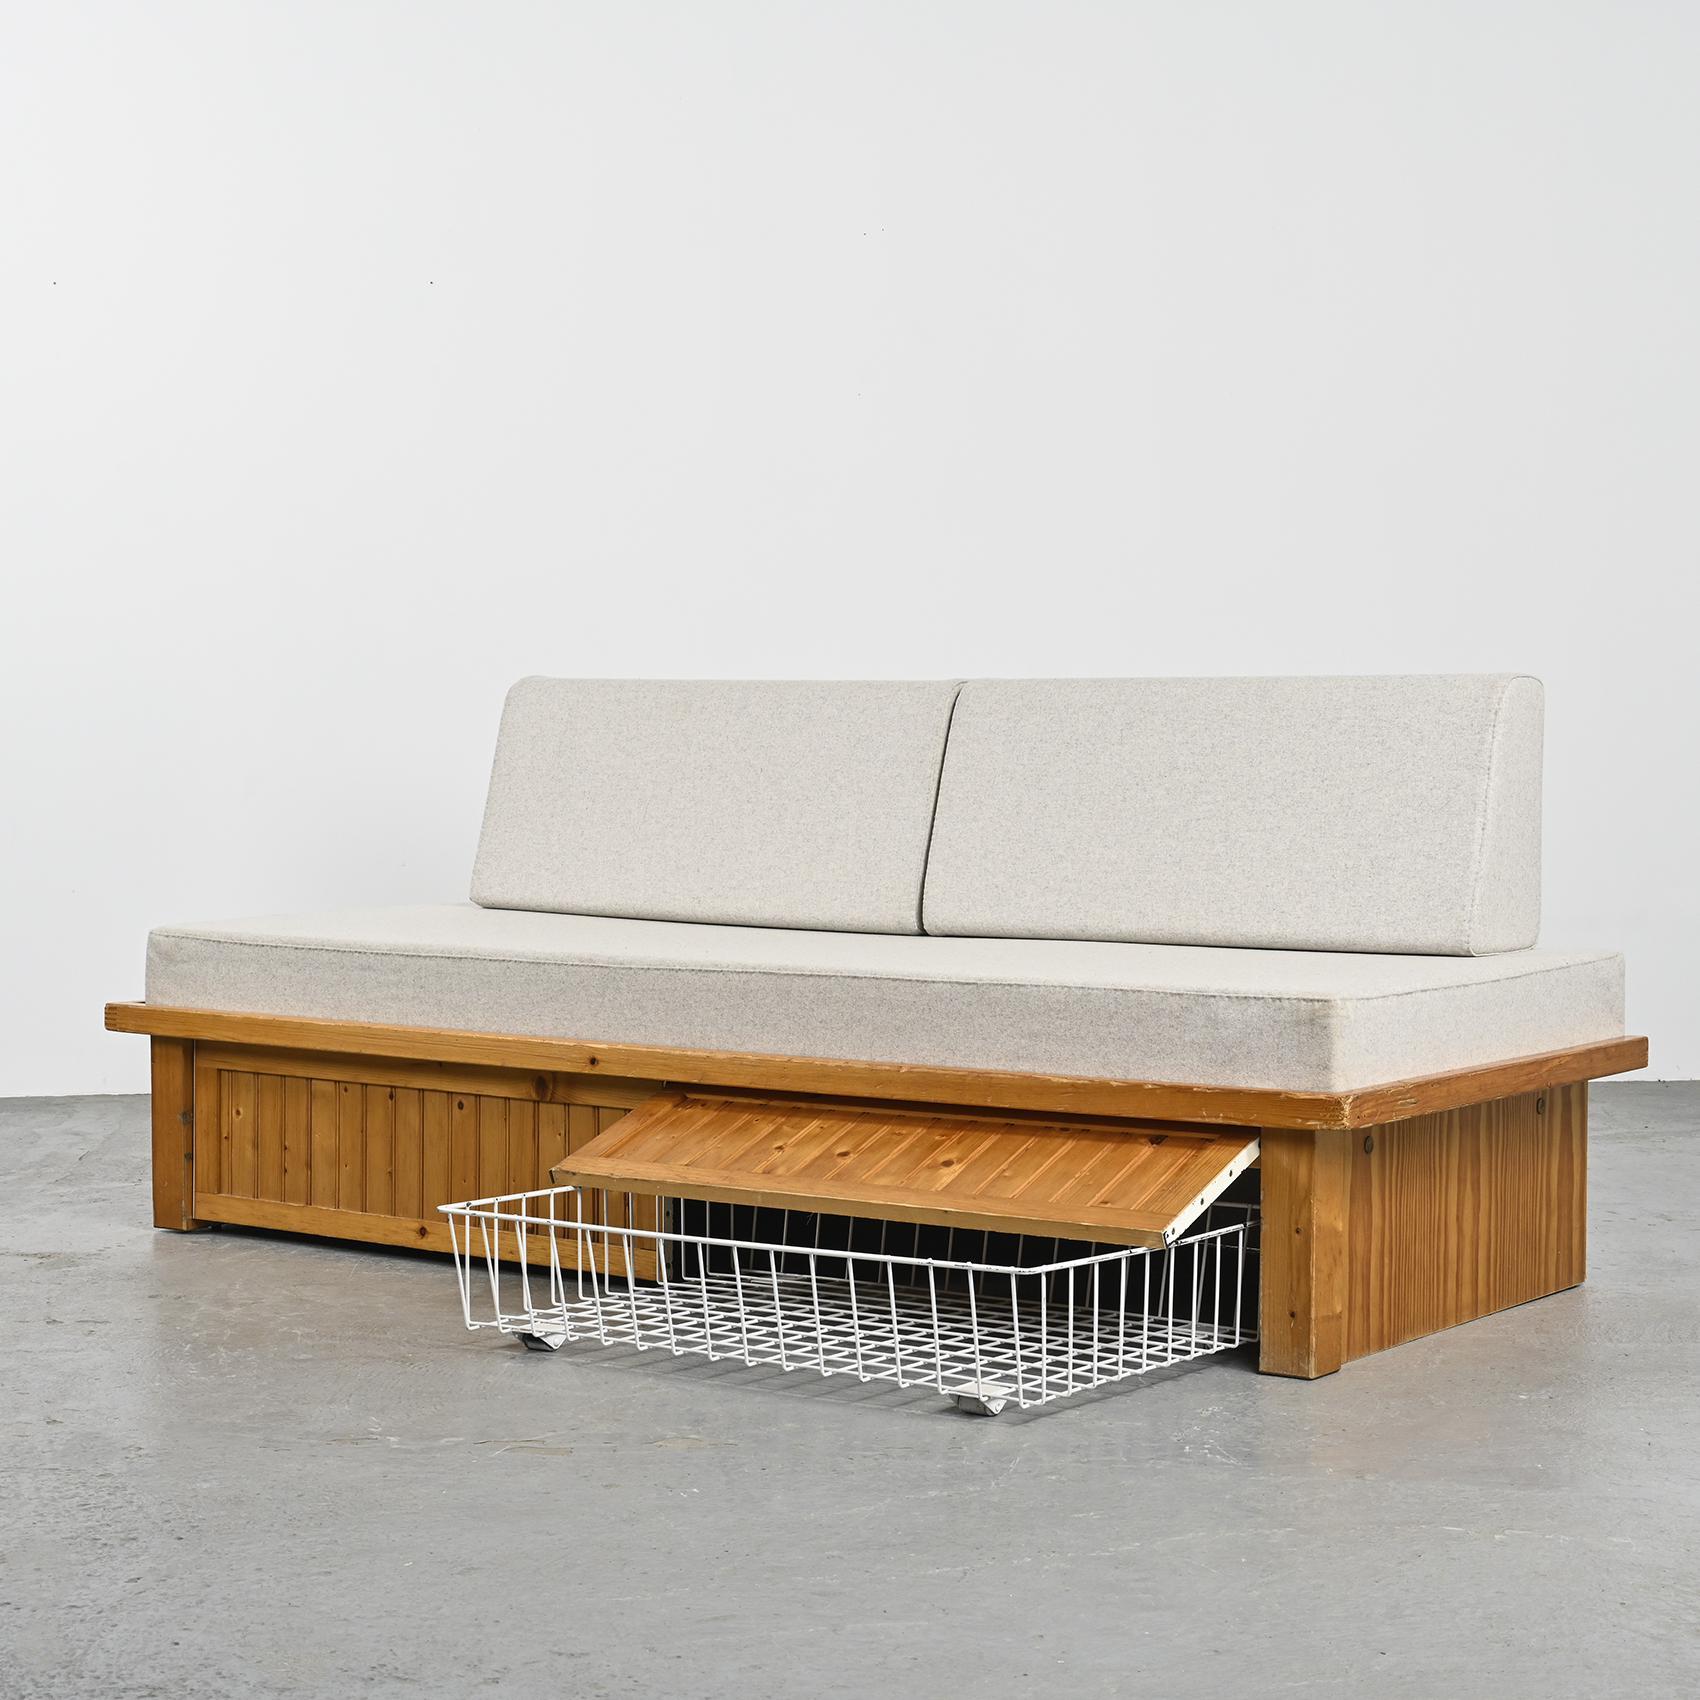 This example of a sofa bed was once part of the furnishings in the apartments of the iconic Résidence Nova in Les Arcs, a creation of the talented Charlotte Perriand.

The structure of this piece of furniture, crafted with carefully arranged pine